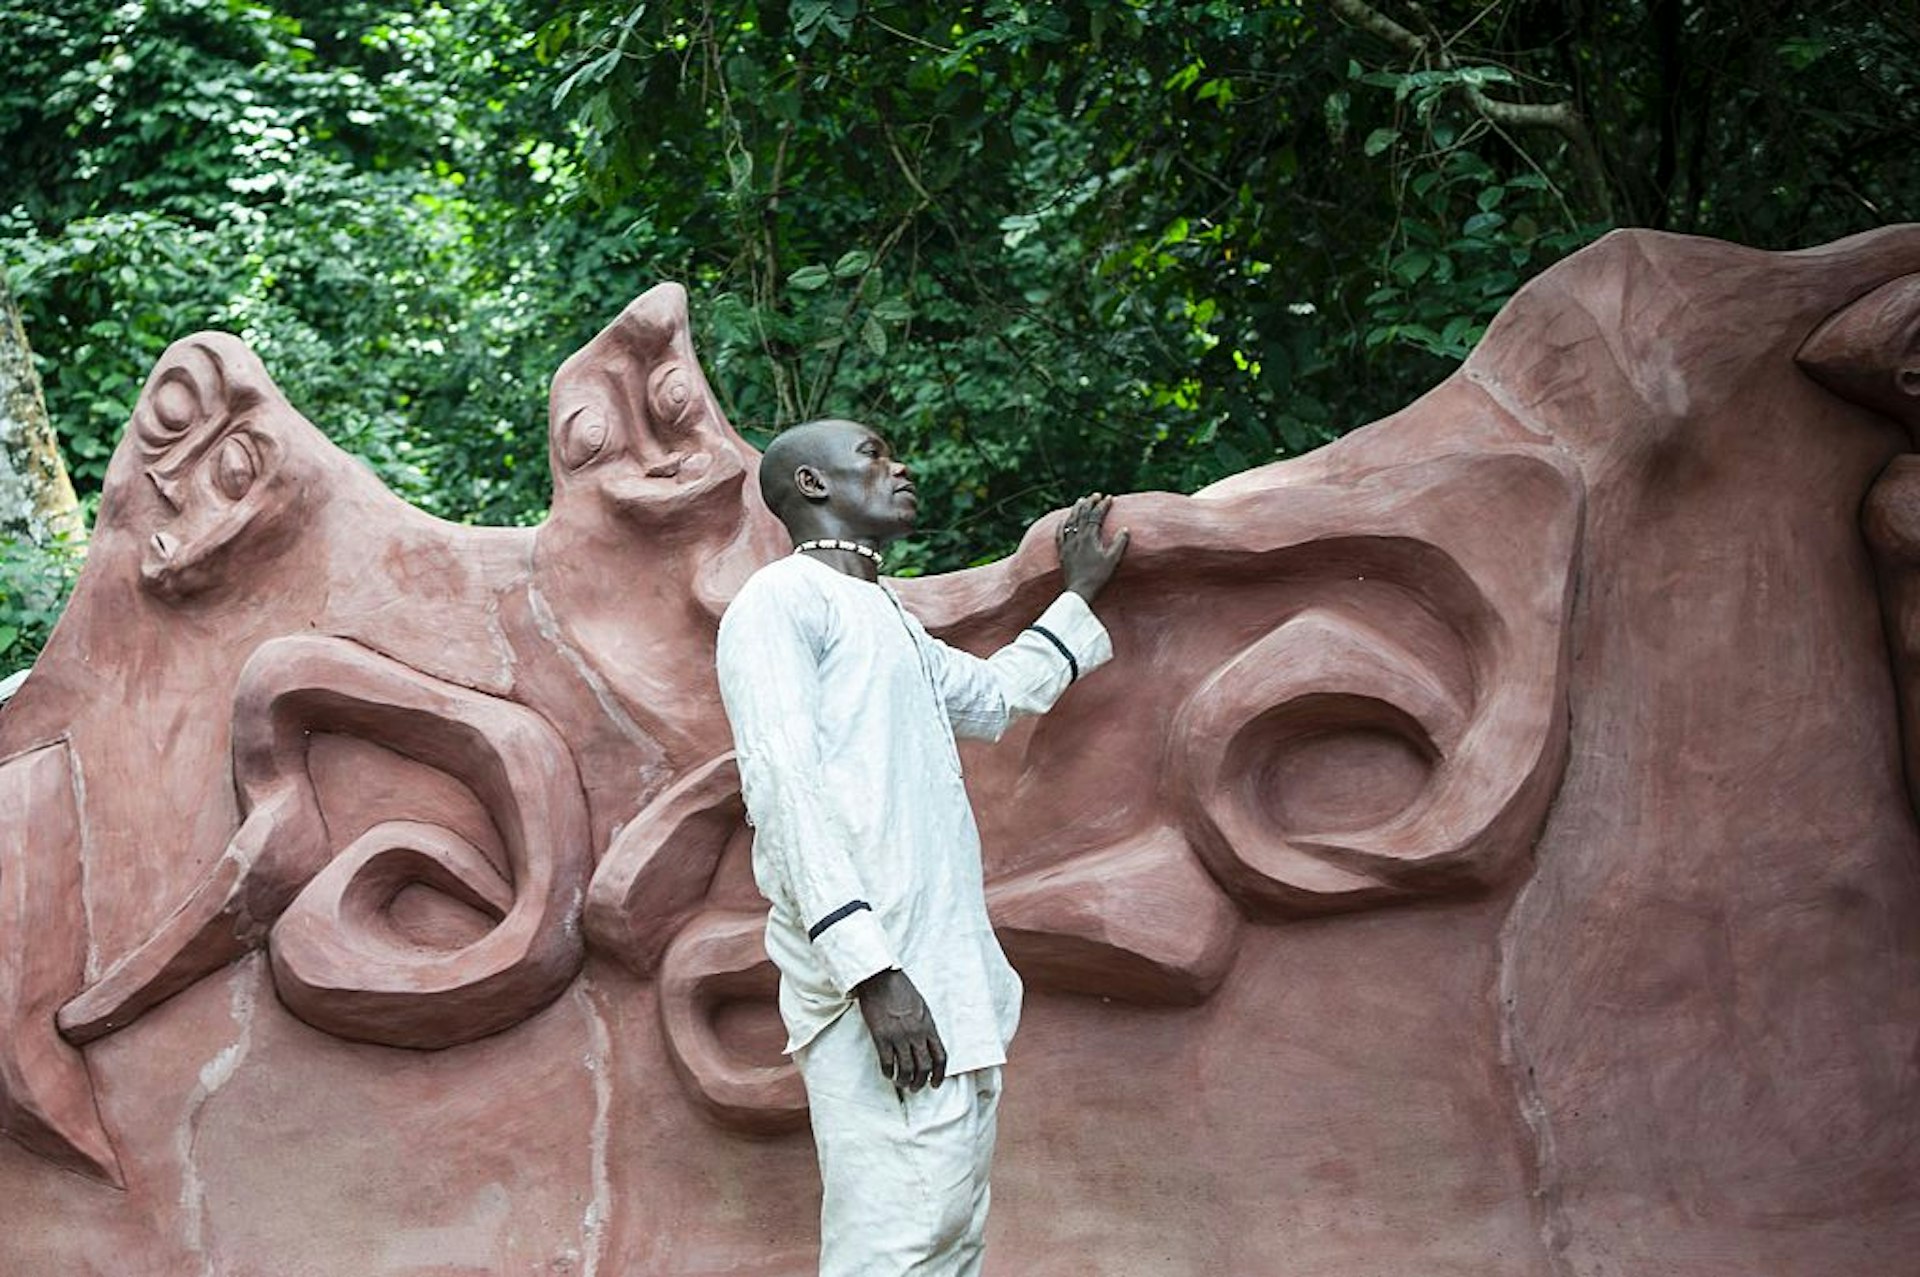 A man stands by a sculpture near the sacred grove during the Osun-Osogbo Festival in Osogbo, Nigeria